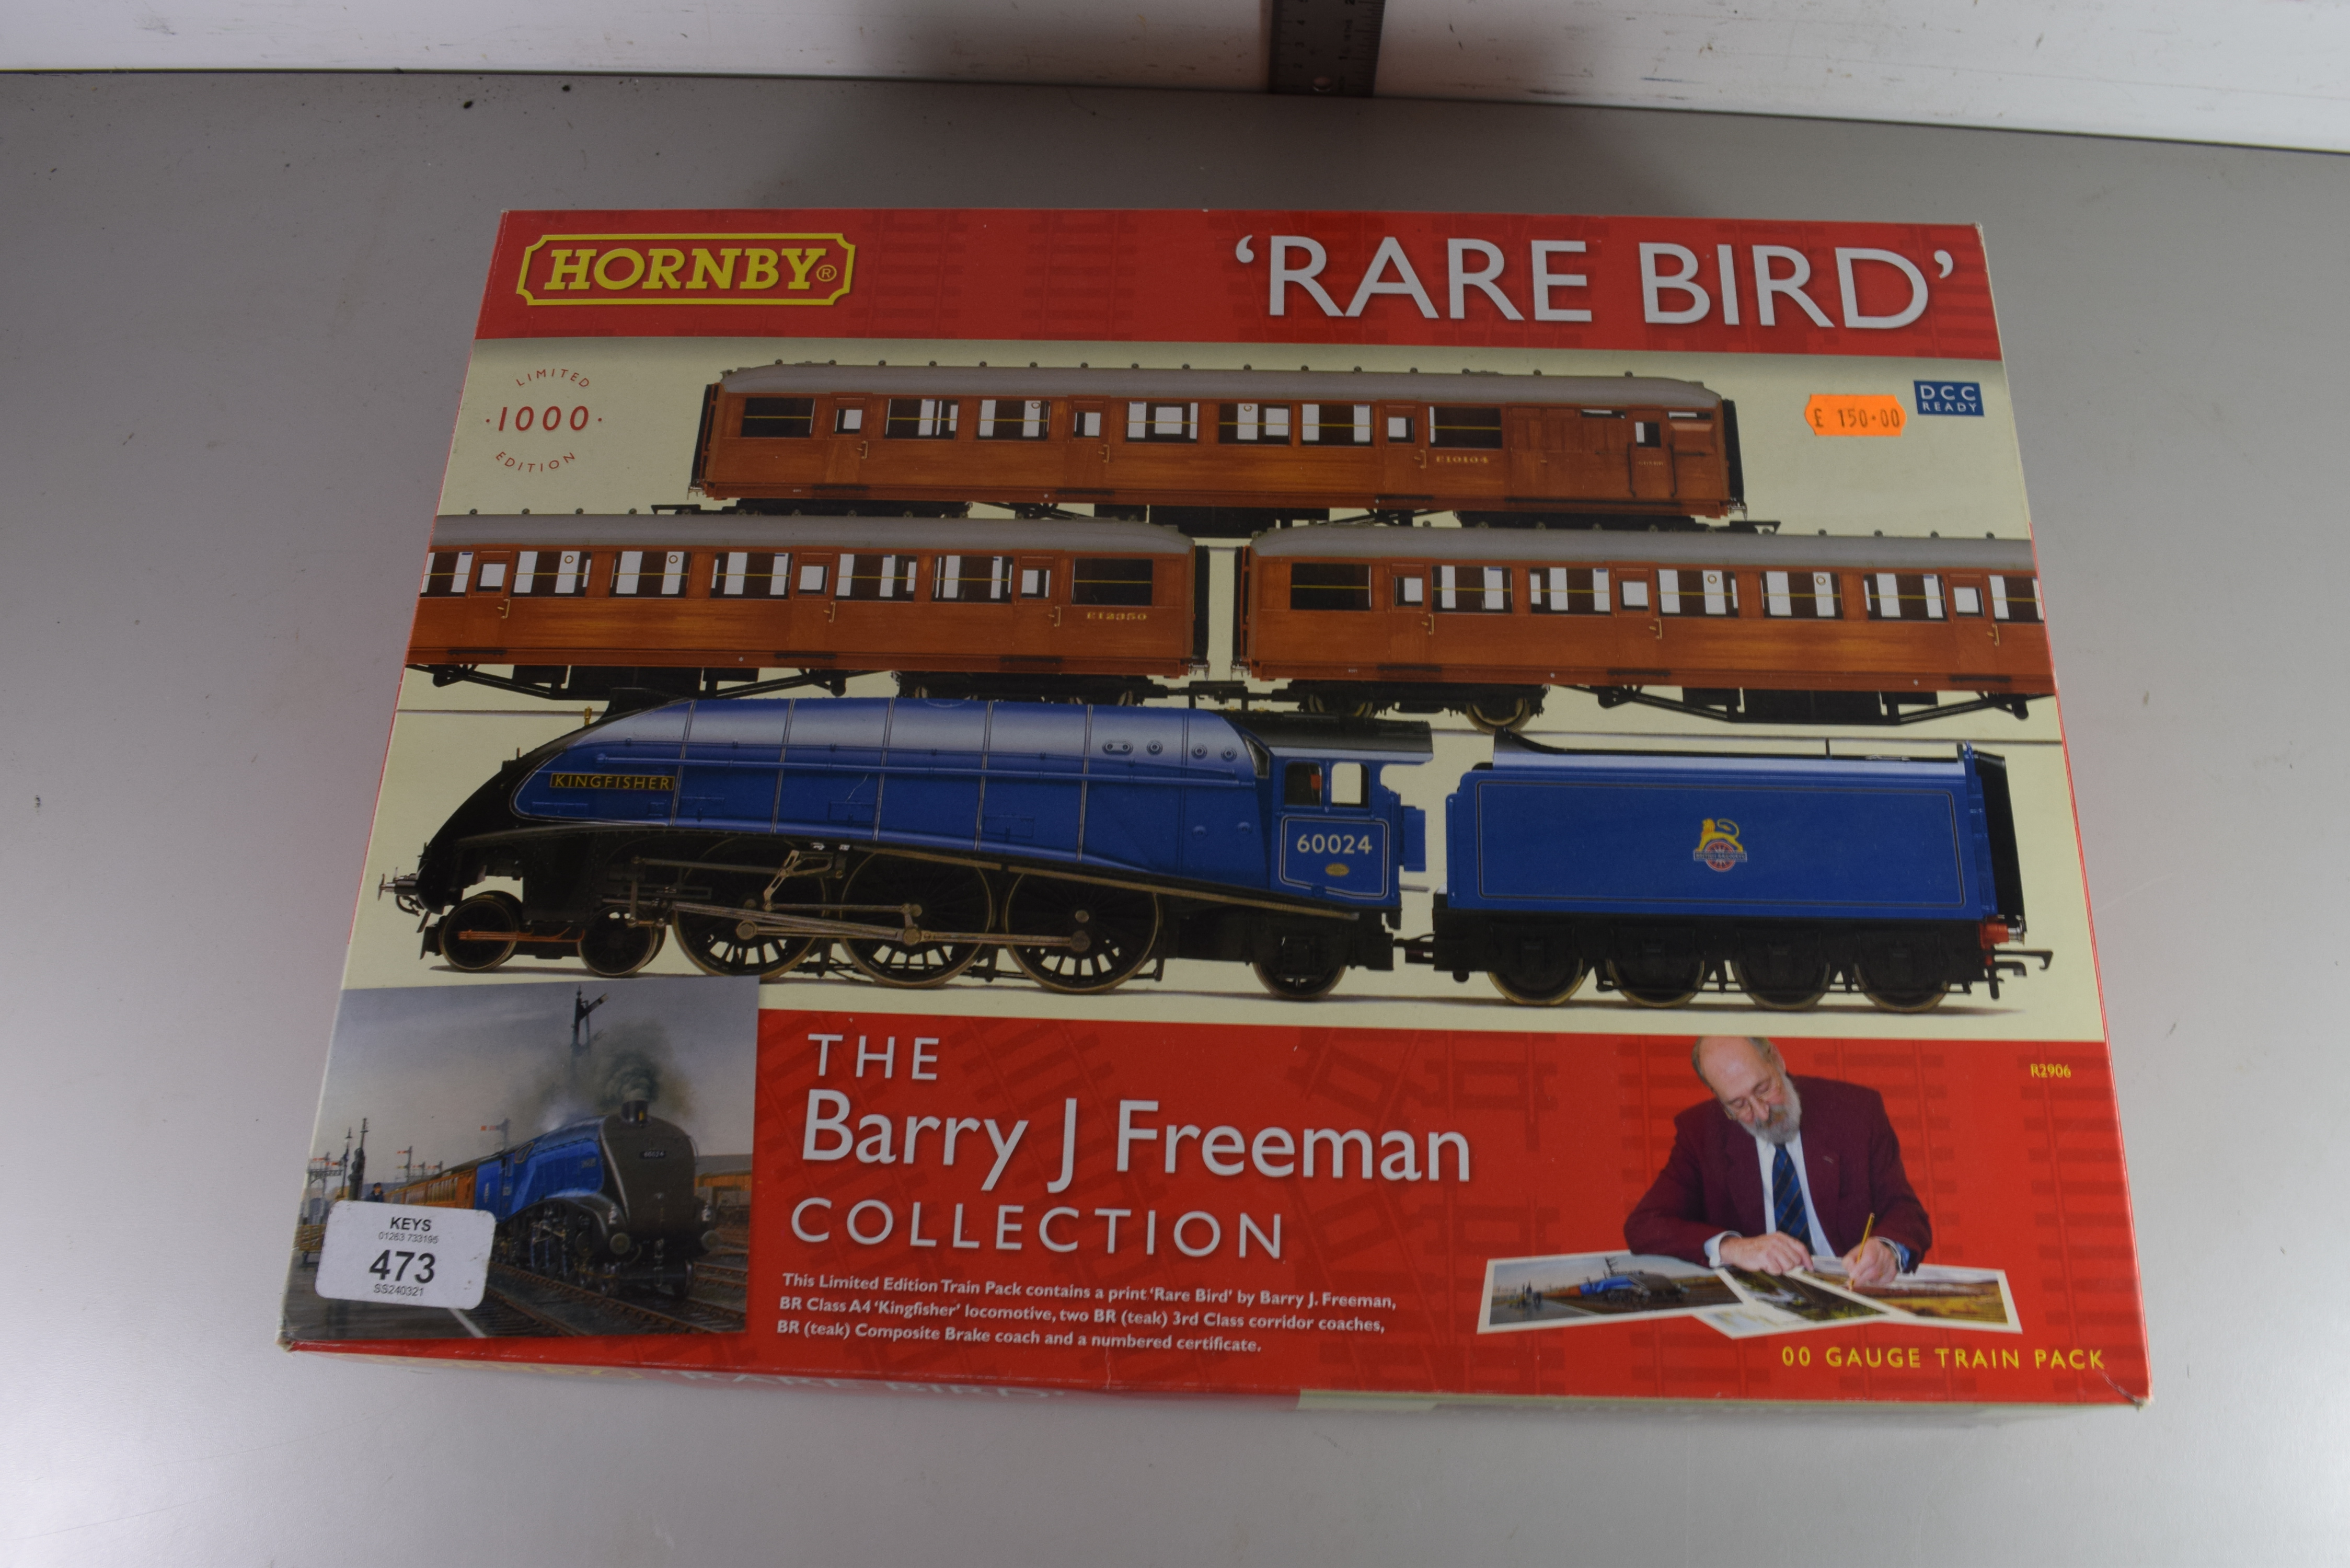 Boxed Hornby 00 gauge Rare Bird from the Barry J Freeman collection set containing Kingfisher No - Image 3 of 3